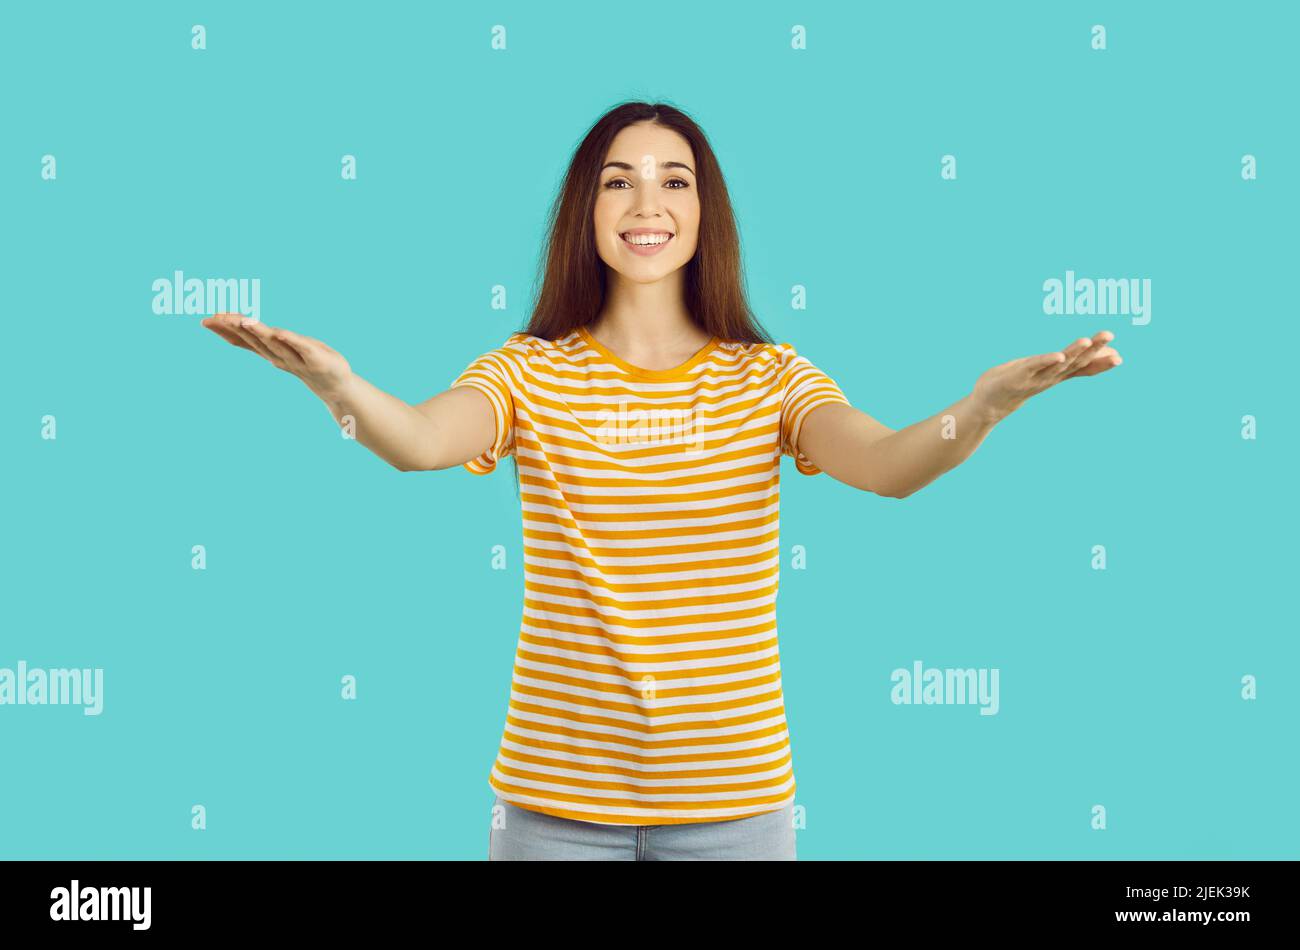 Smiling woman stretch hands to camera Stock Photo